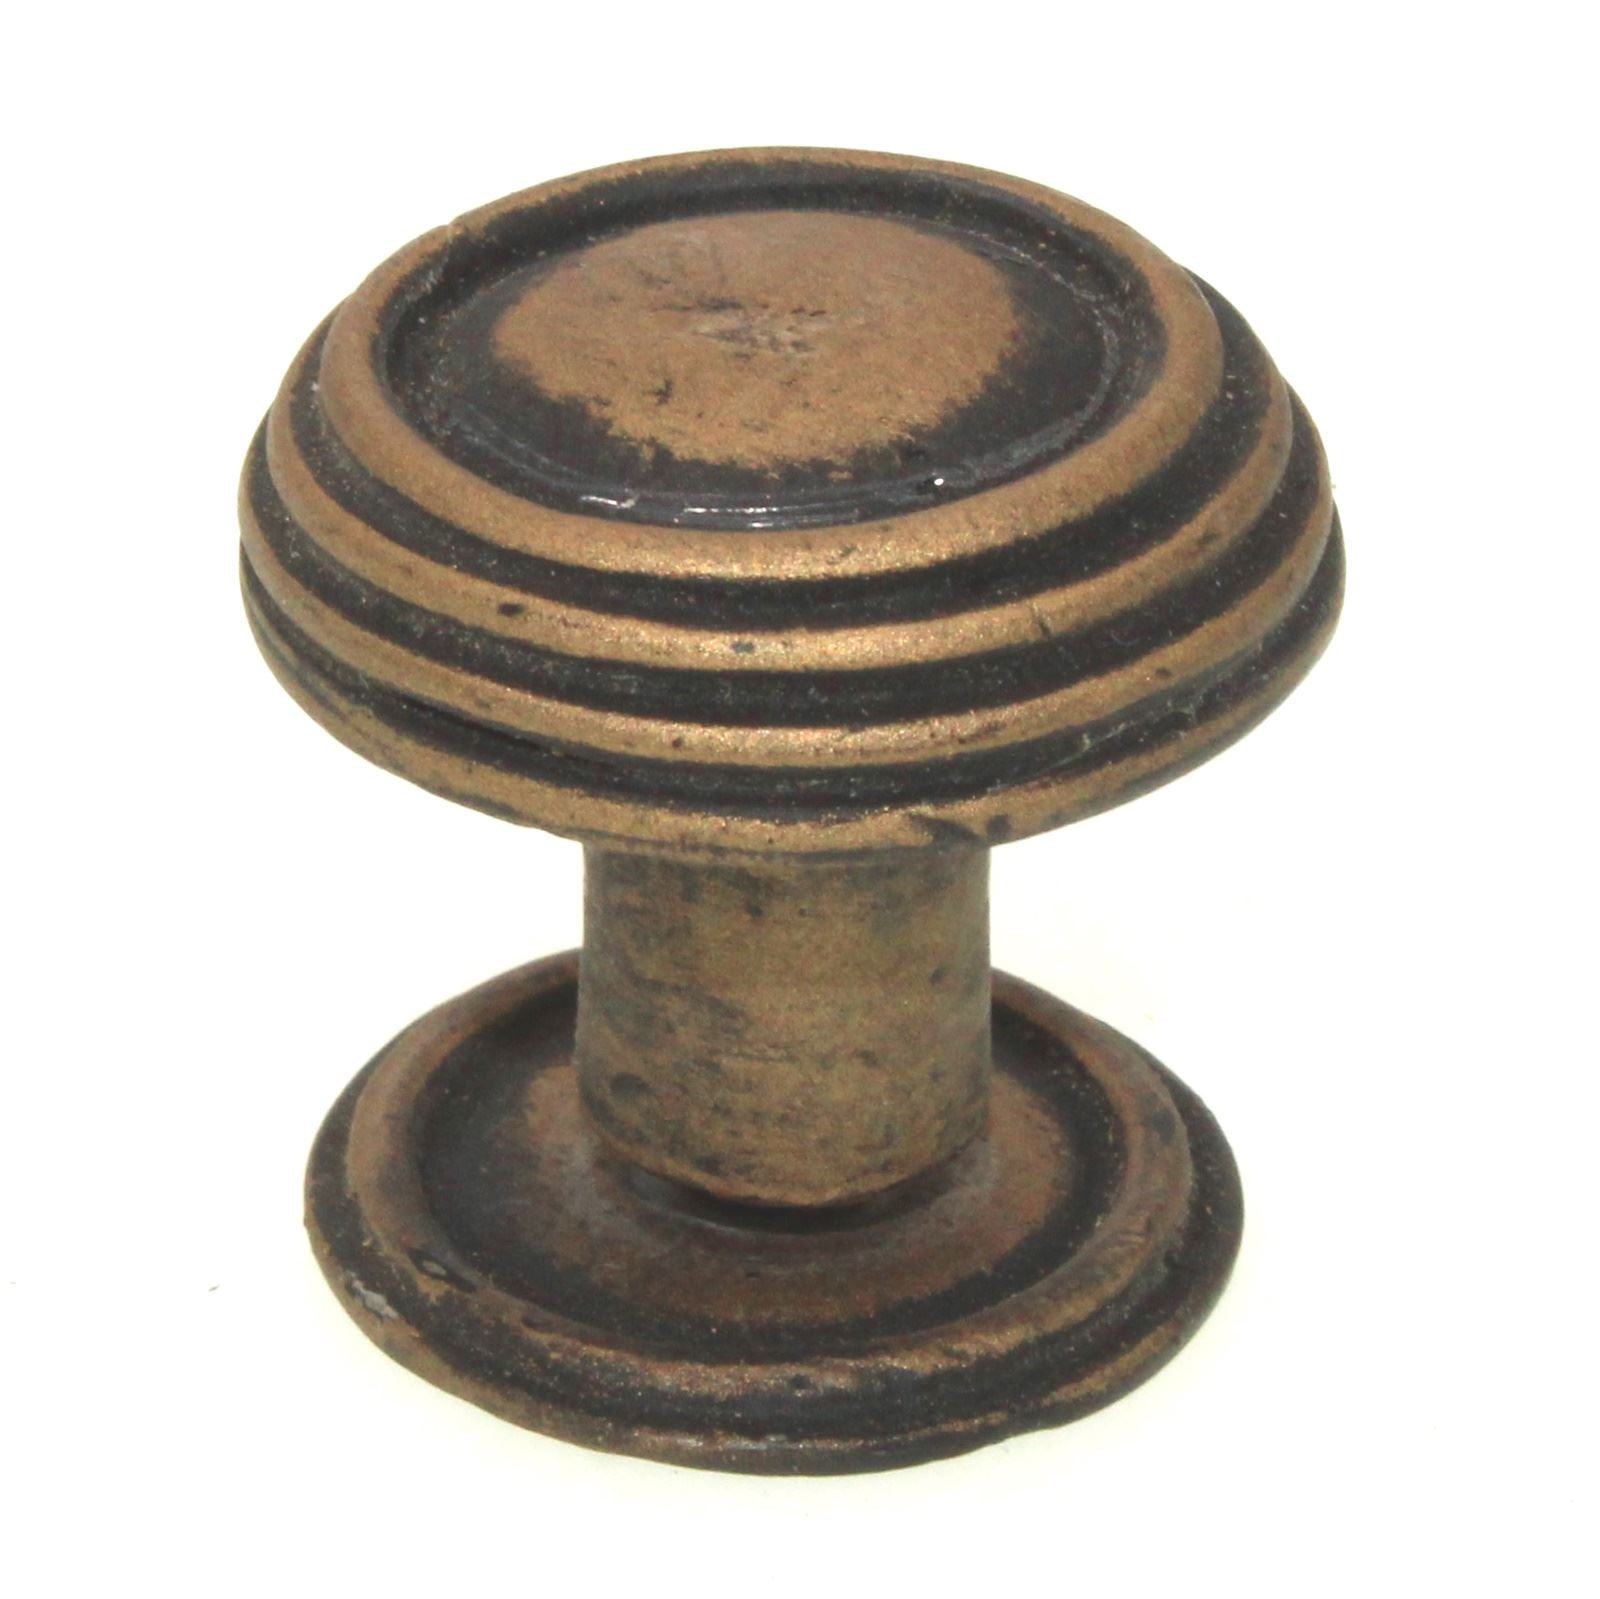 Anne at Home Rustic Sonnet Large 1 1/4" Ringed Cabinet Knob Antique Gold 1302-21